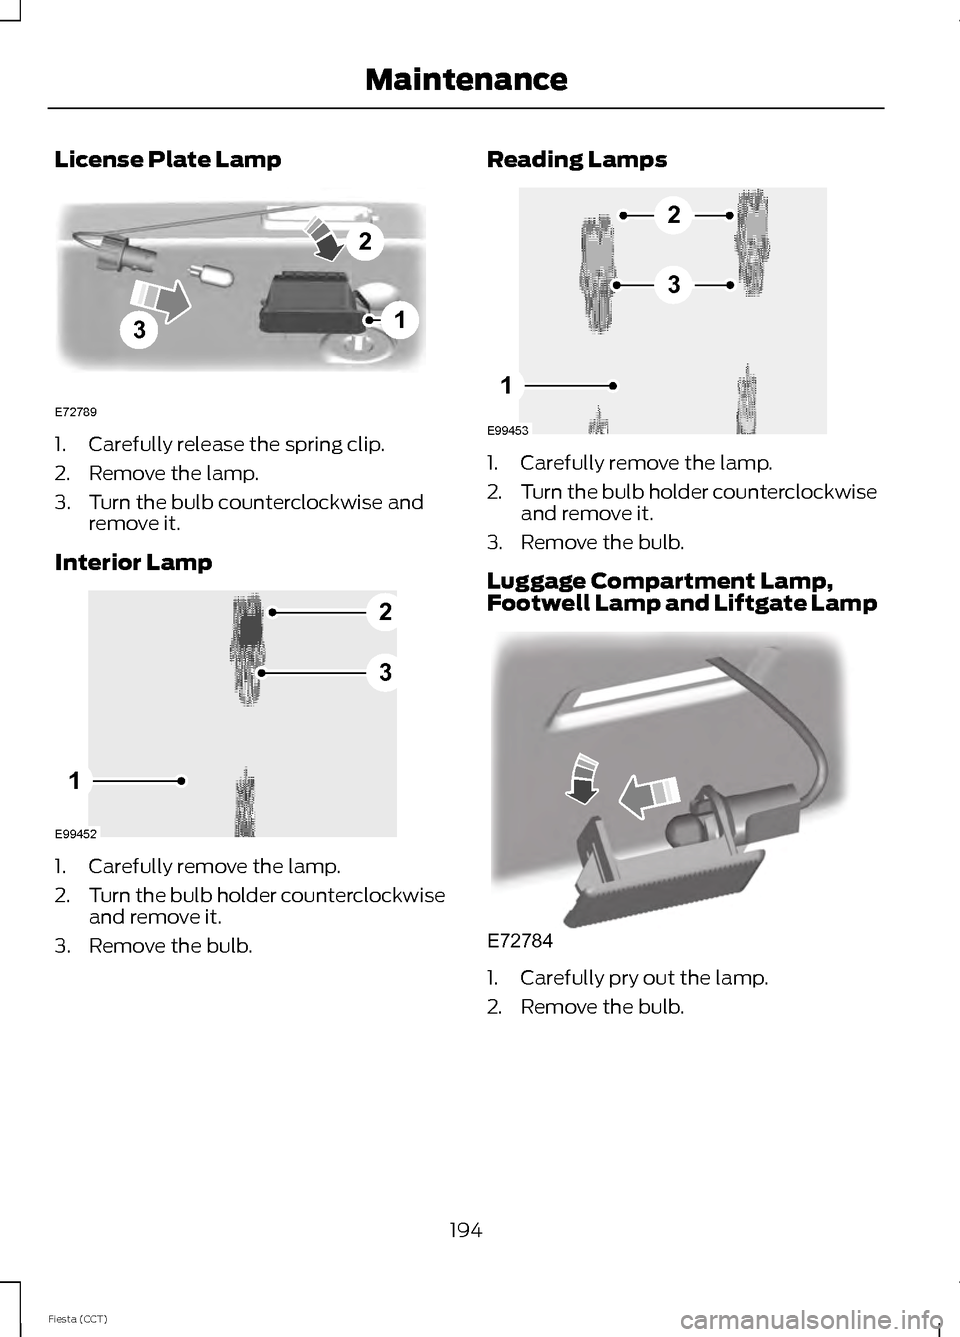 FORD FIESTA 2014 6.G User Guide License Plate Lamp
1. Carefully release the spring clip.
2. Remove the lamp.
3. Turn the bulb counterclockwise and
remove it.
Interior Lamp 1. Carefully remove the lamp.
2.
Turn the bulb holder counte